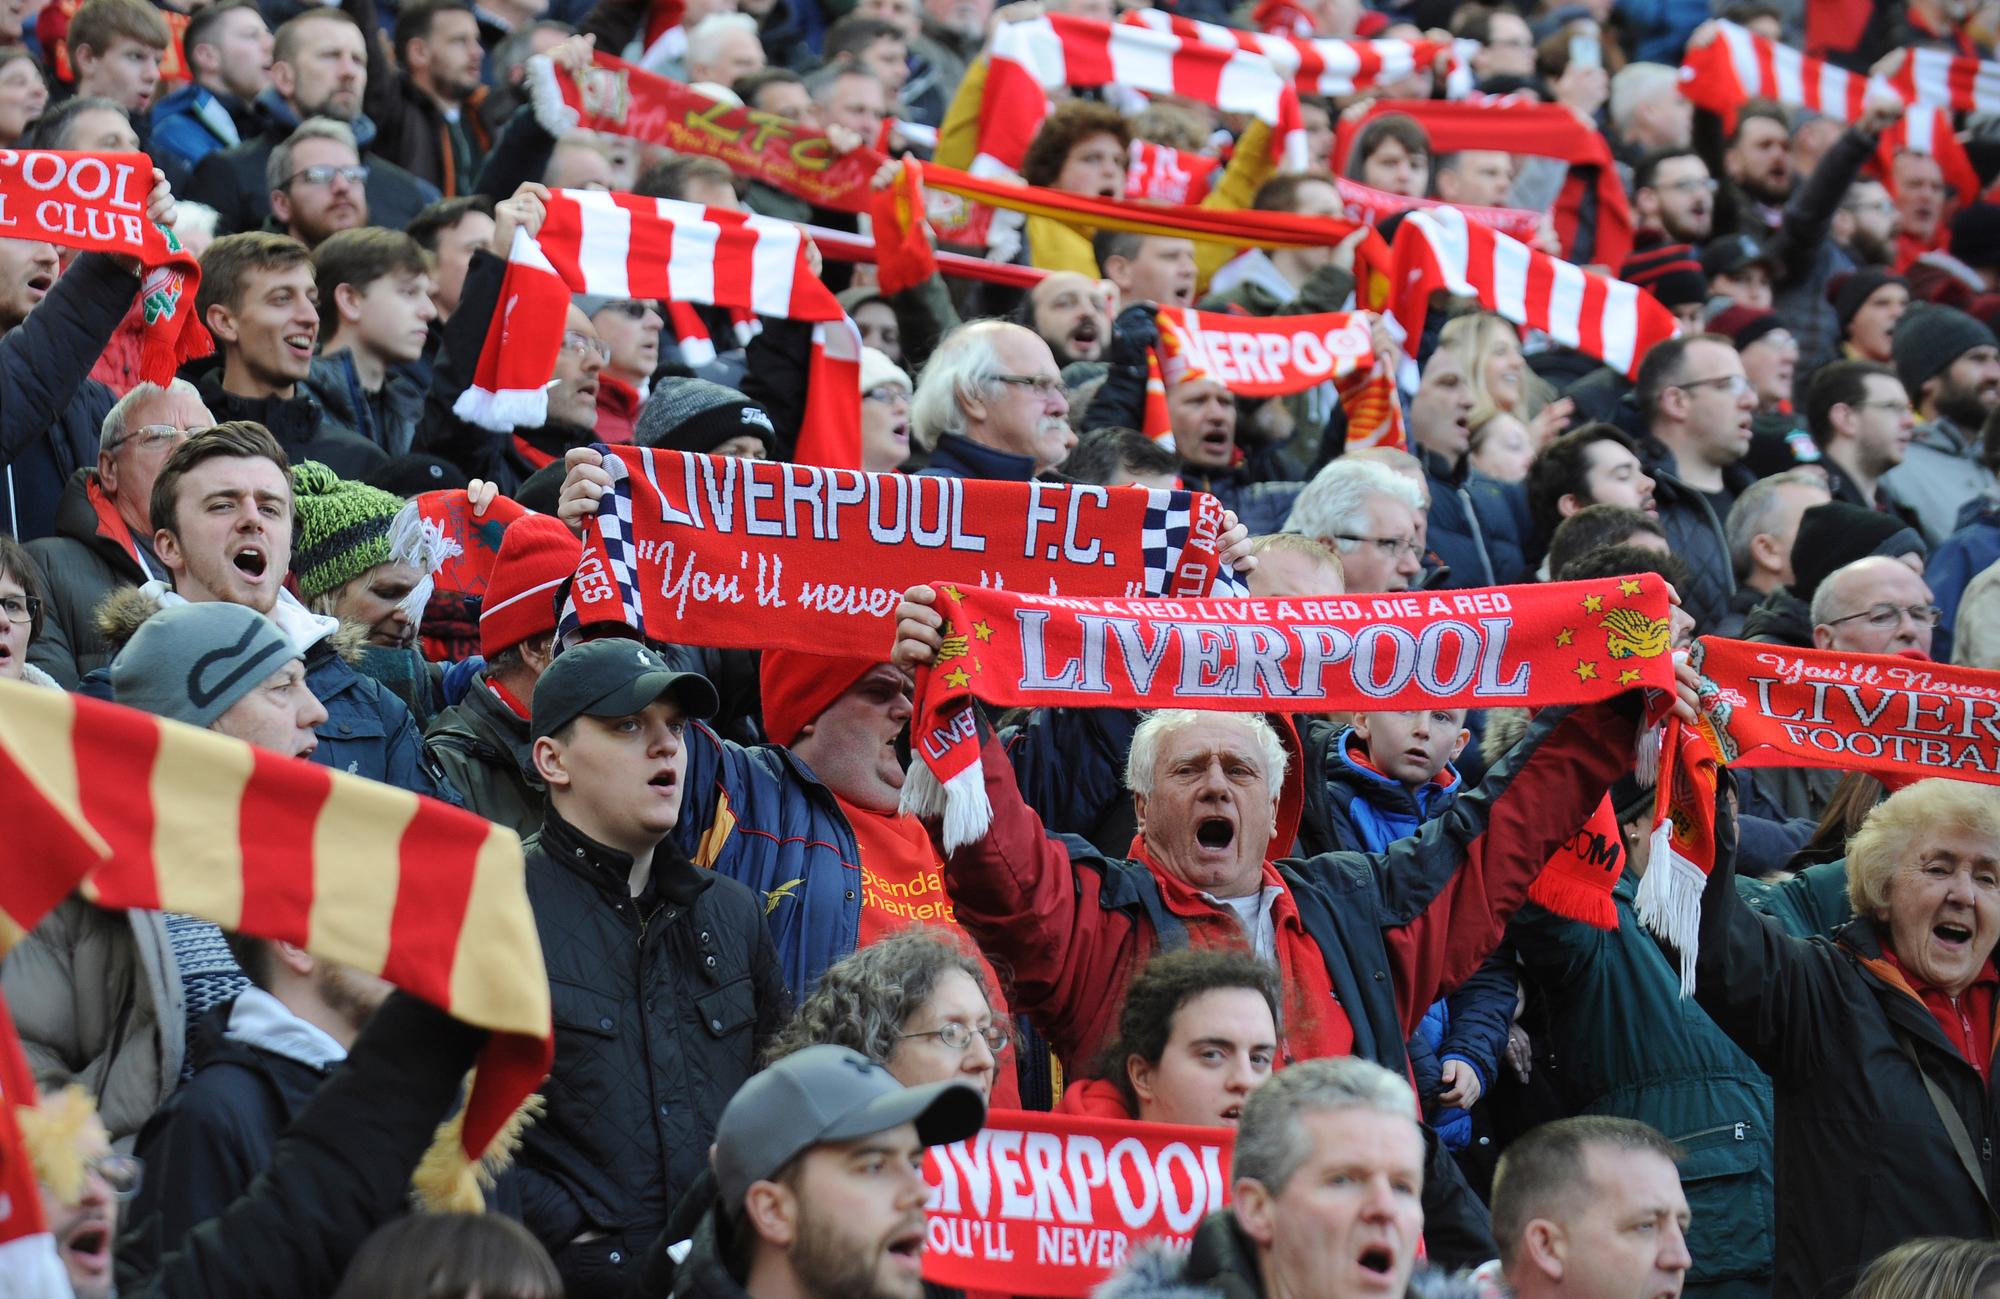 Liverpool supporters cheer prior to the English Premier League soccer match between Liverpool and AFC Bournemouth at Anfield stadium in Liverpool, England, Saturday, Feb. 9, 2019. (AP Photo/Rui Vieira)